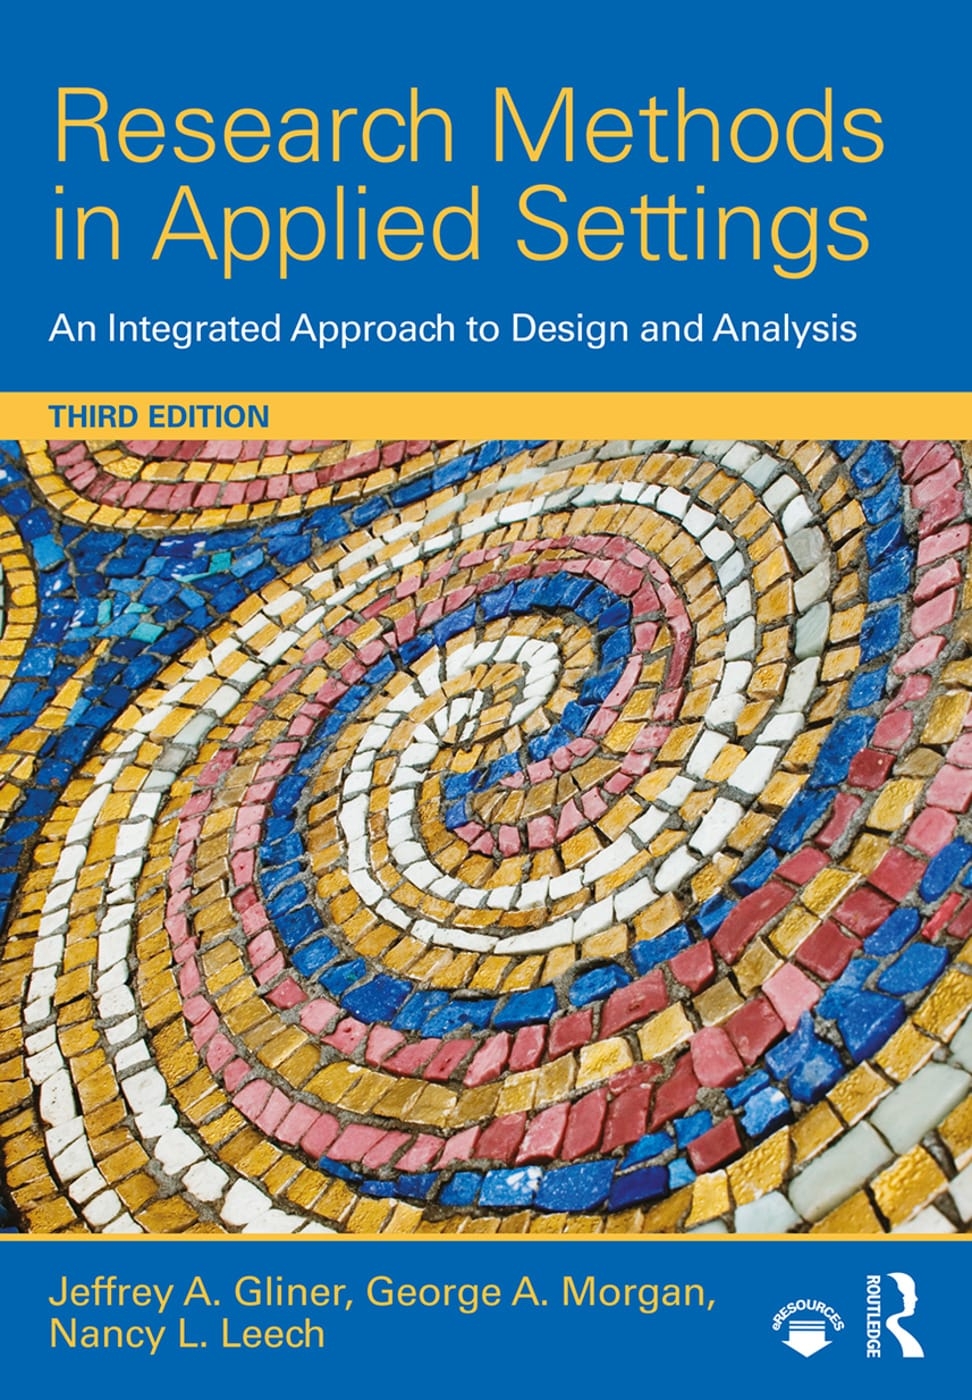 Research Methods in Applied Settings: An Integrated Approach to Design and Analysis, Third Edition